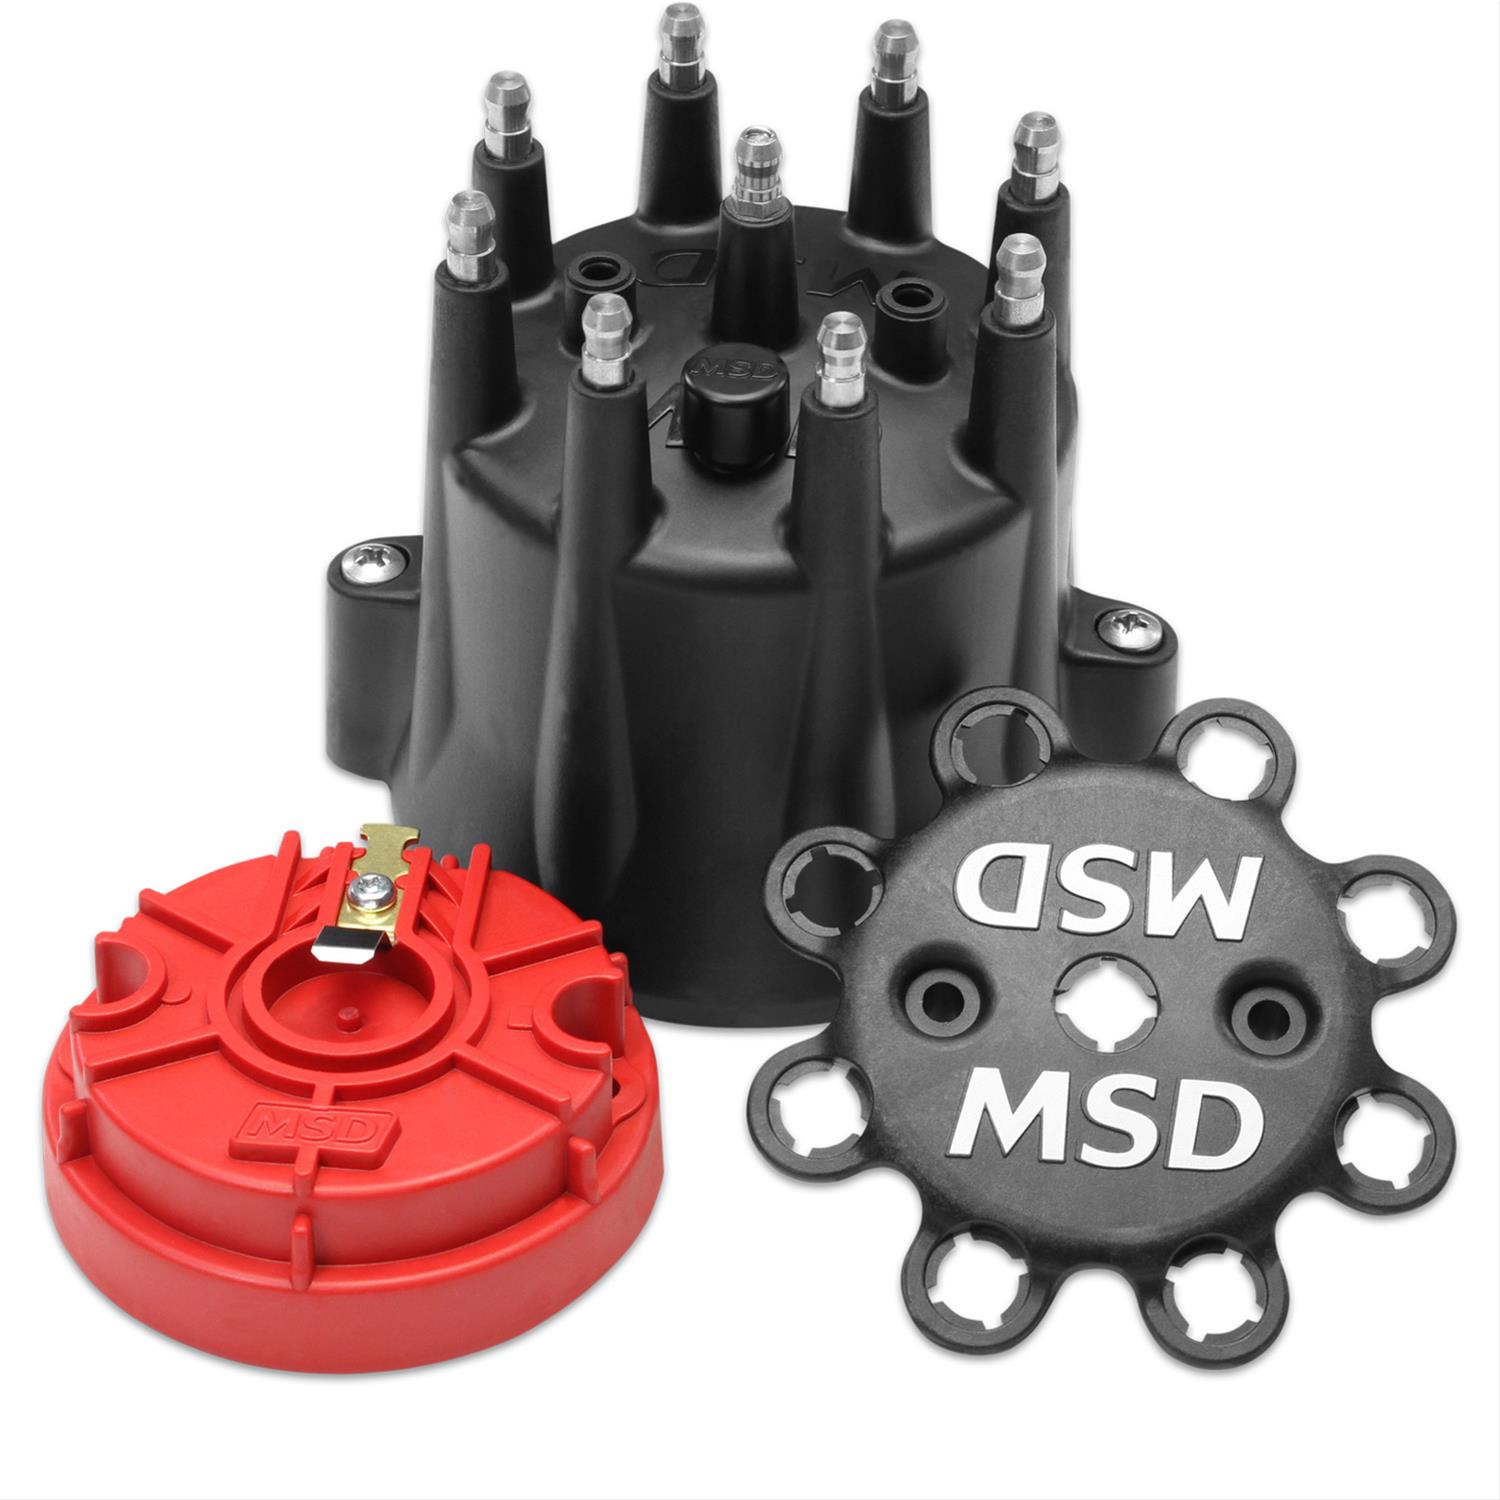 MSD Ignition 8433 Distributor Cap Replacement for Pro-Billet 